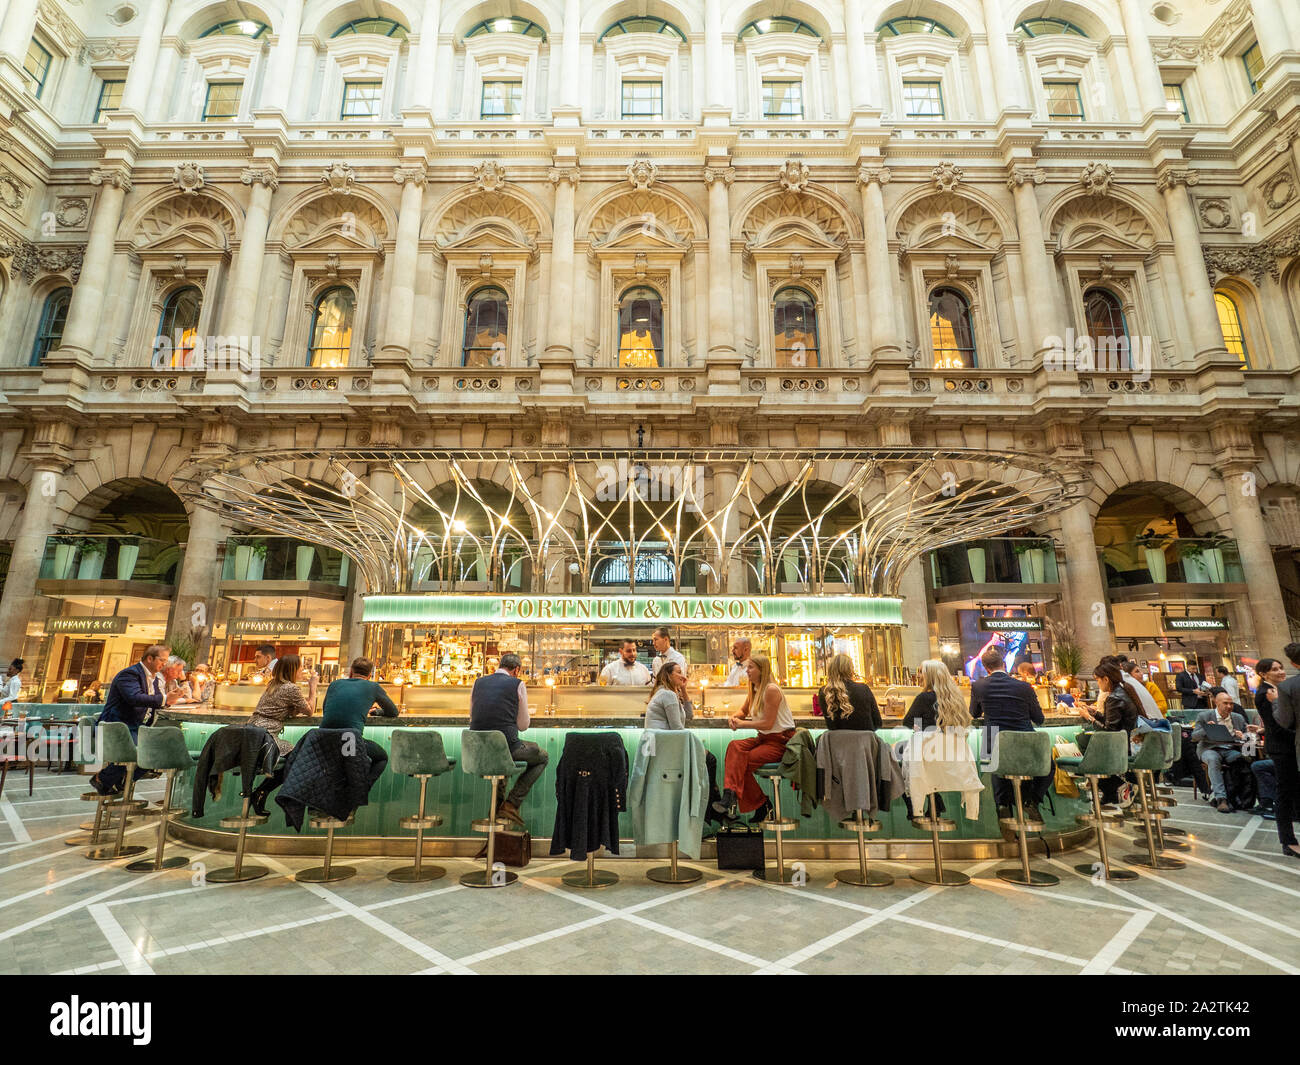 The Royal Exchange, now a luxury shopping location with Fortnum and Mason's bar & restaurant in the middle. London, England. Stock Photo